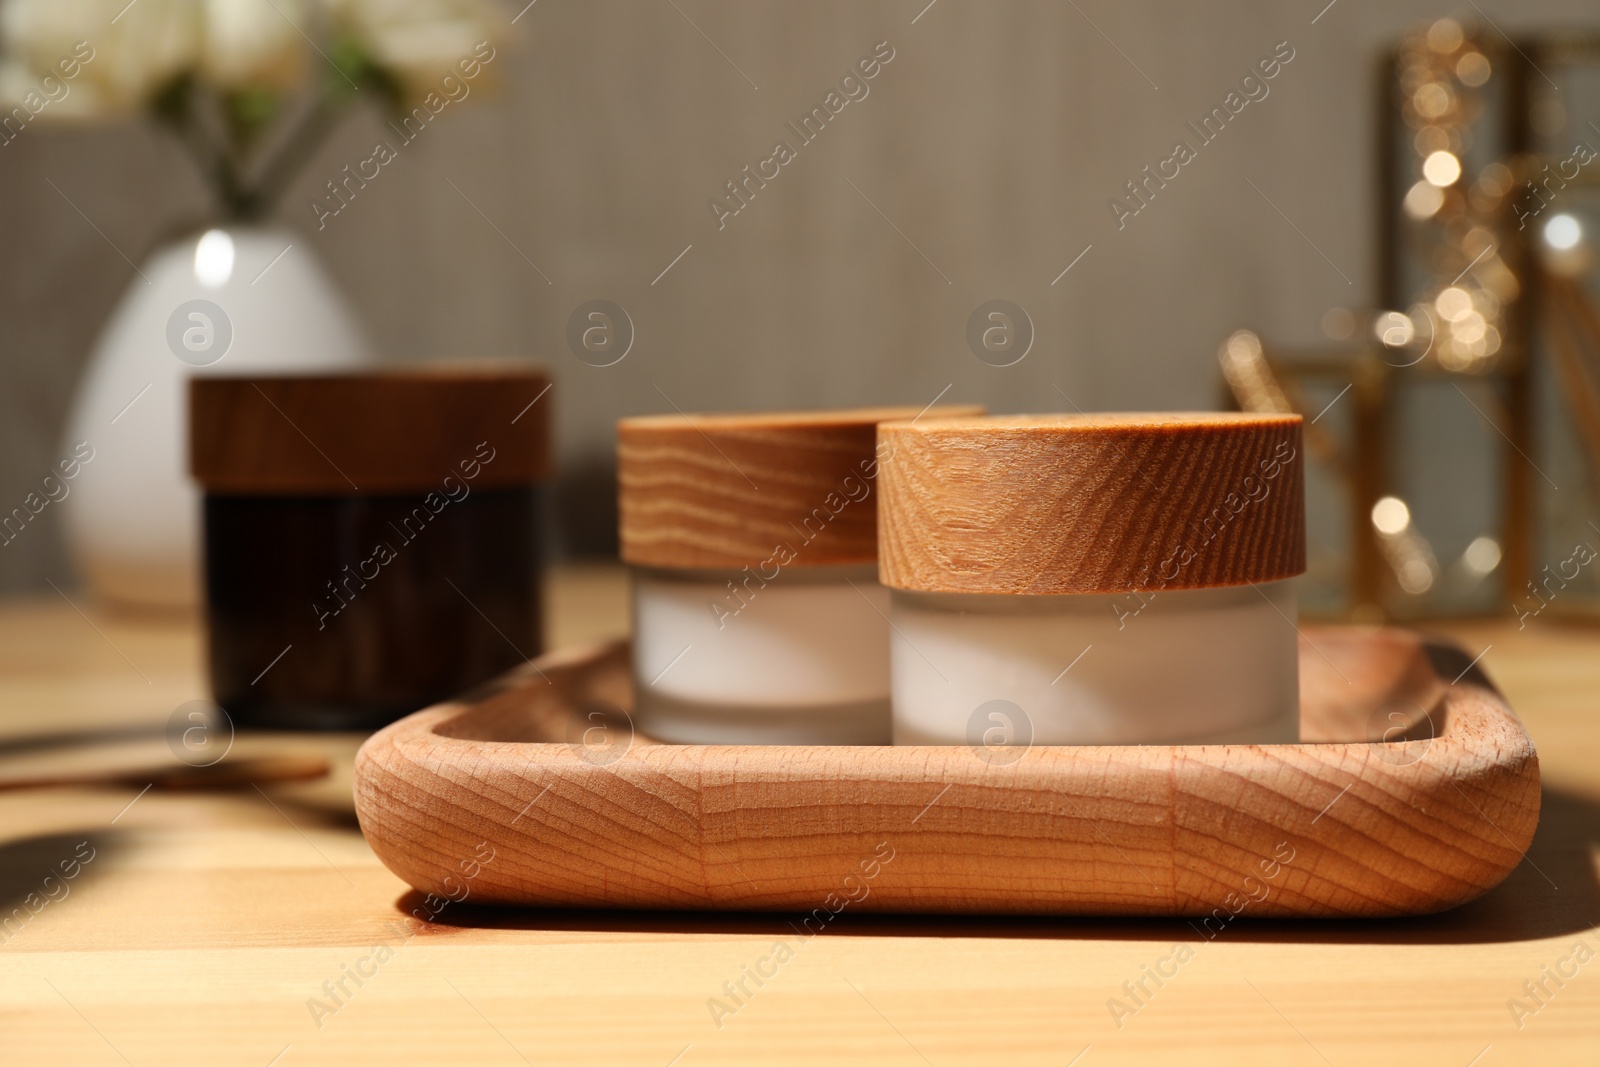 Photo of Jars of cream and tray on wooden table, closeup